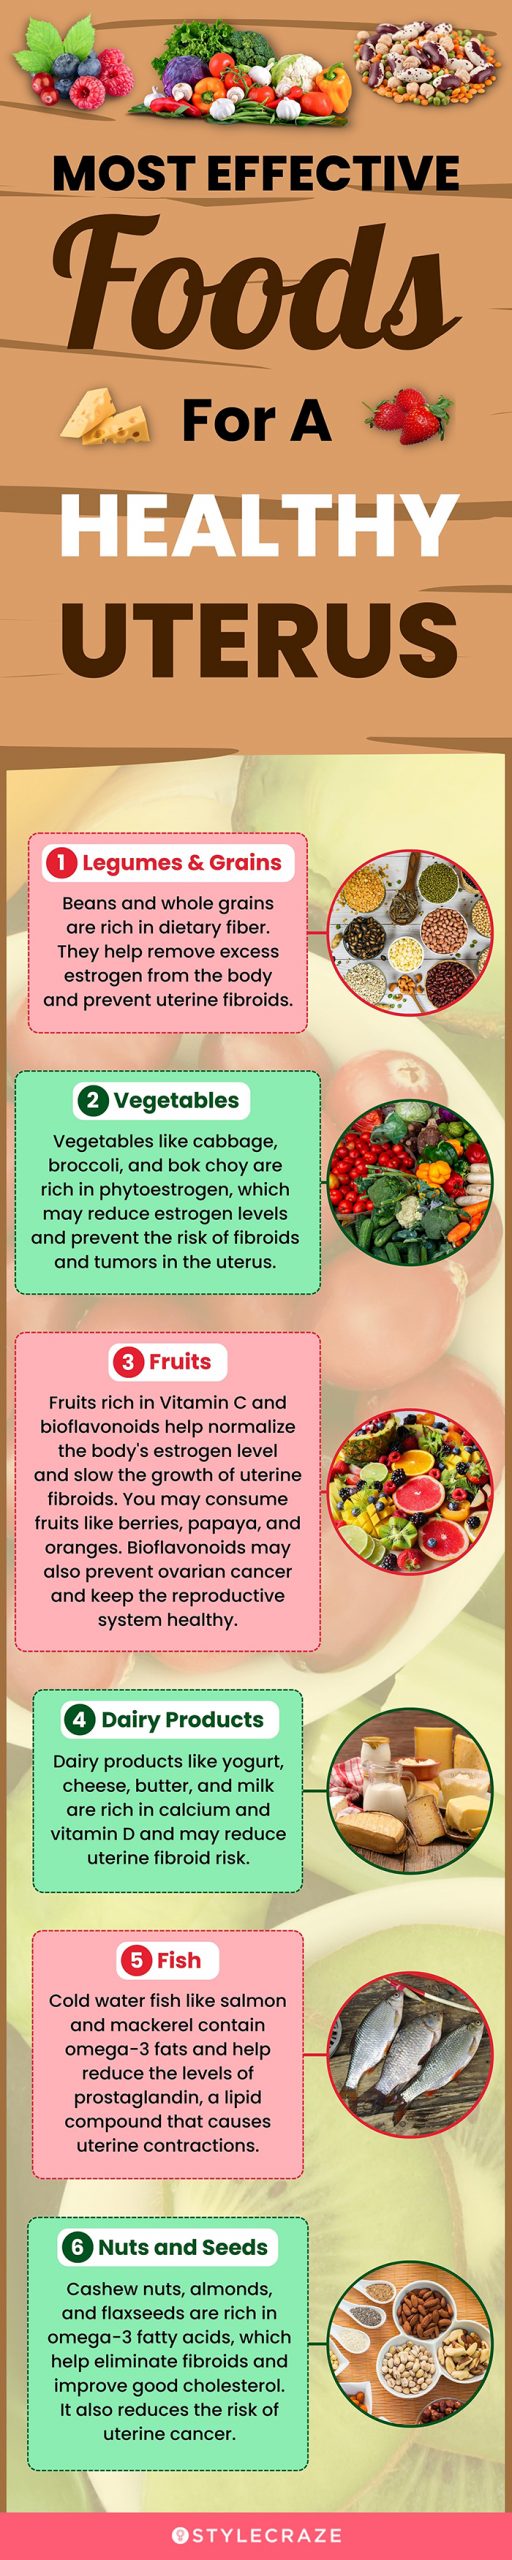 most effective food for a healthy uterus [infographic]